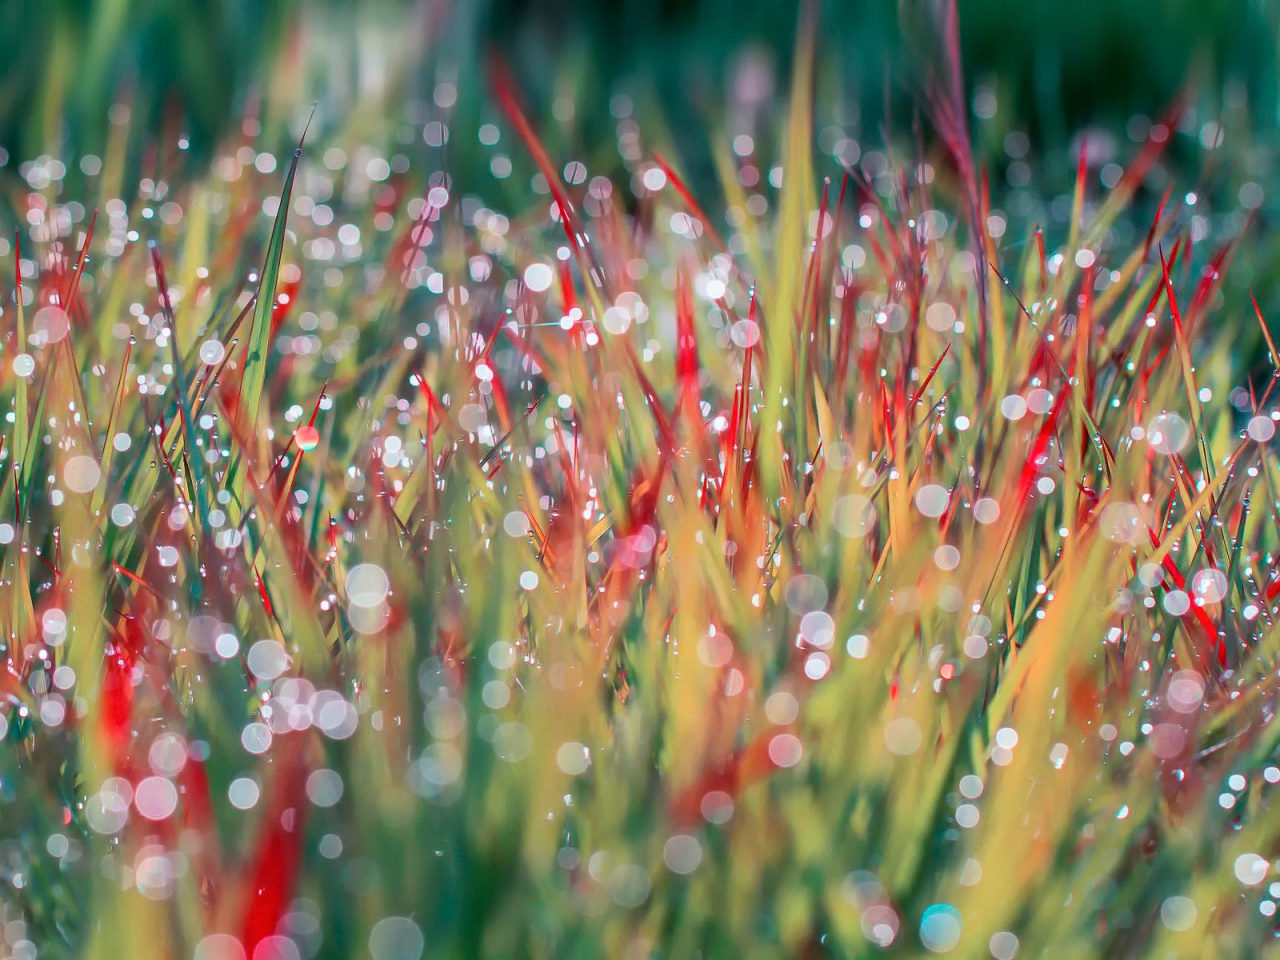 Morning Dew on Grass for 1280 x 960 resolution